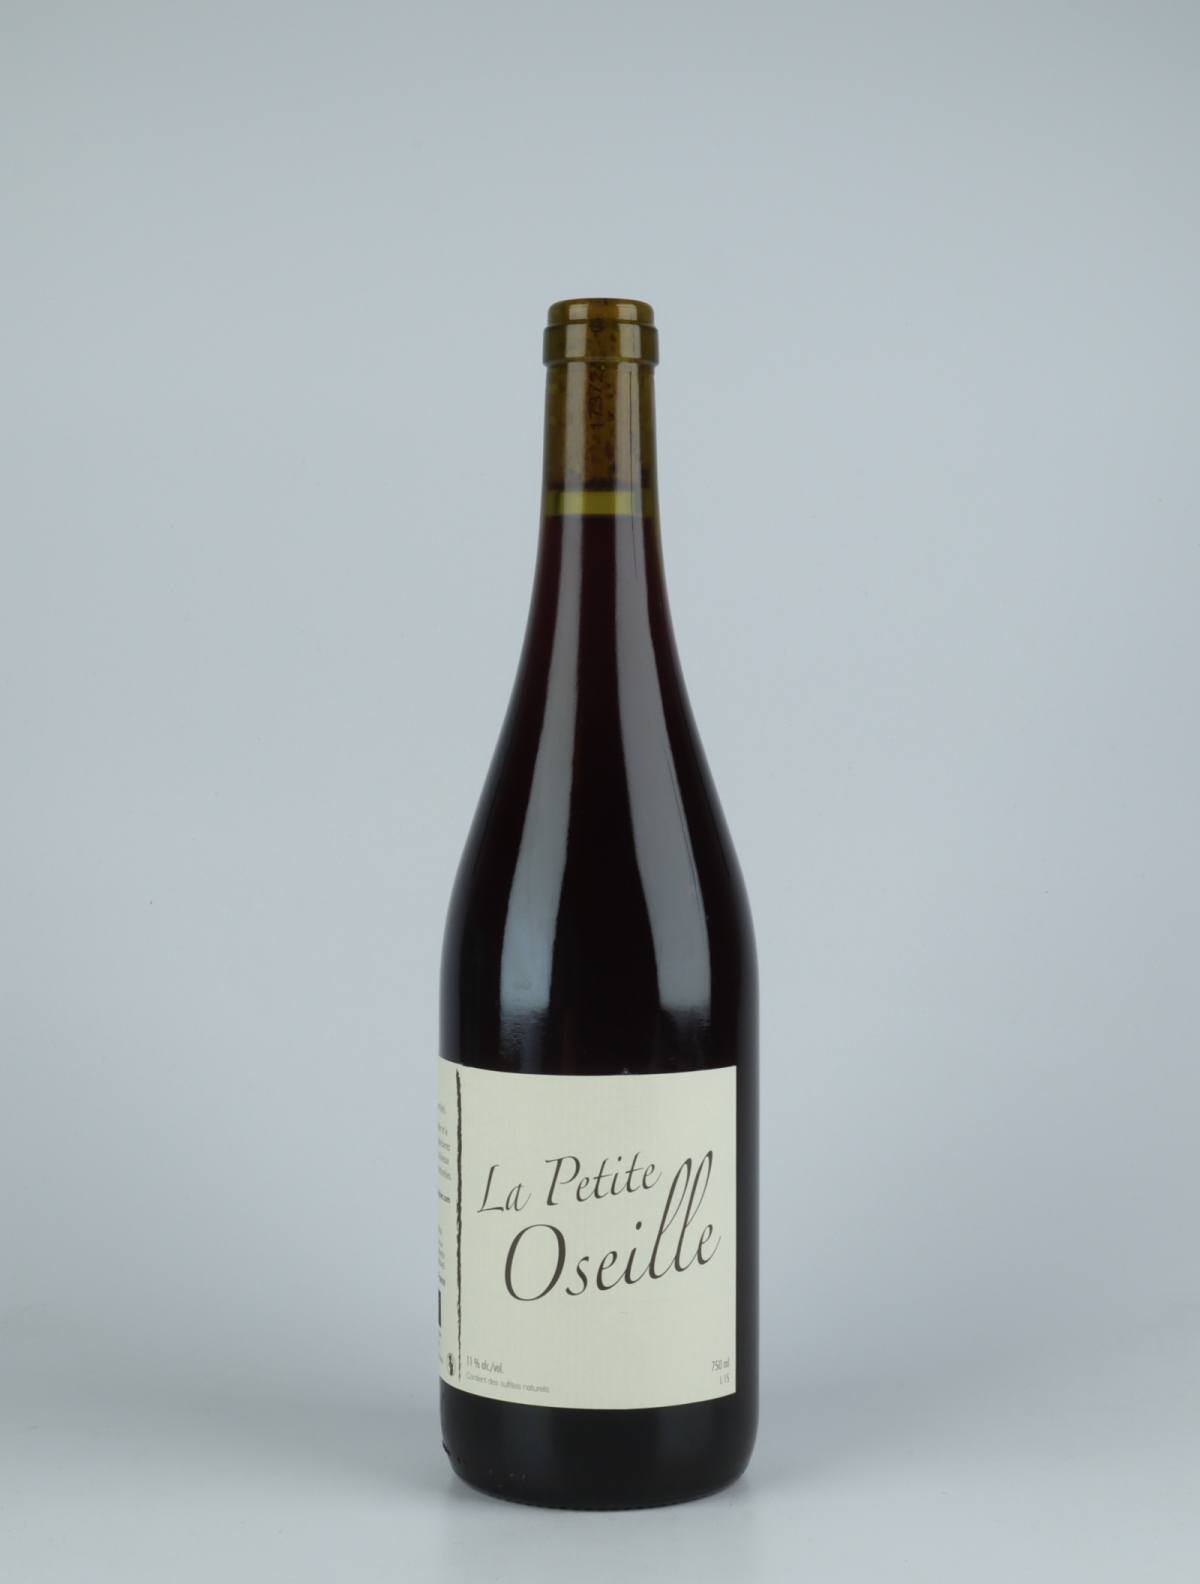 A bottle 2015 La Petite Oseille Red wine from Michel Guignier, Beaujolais in France